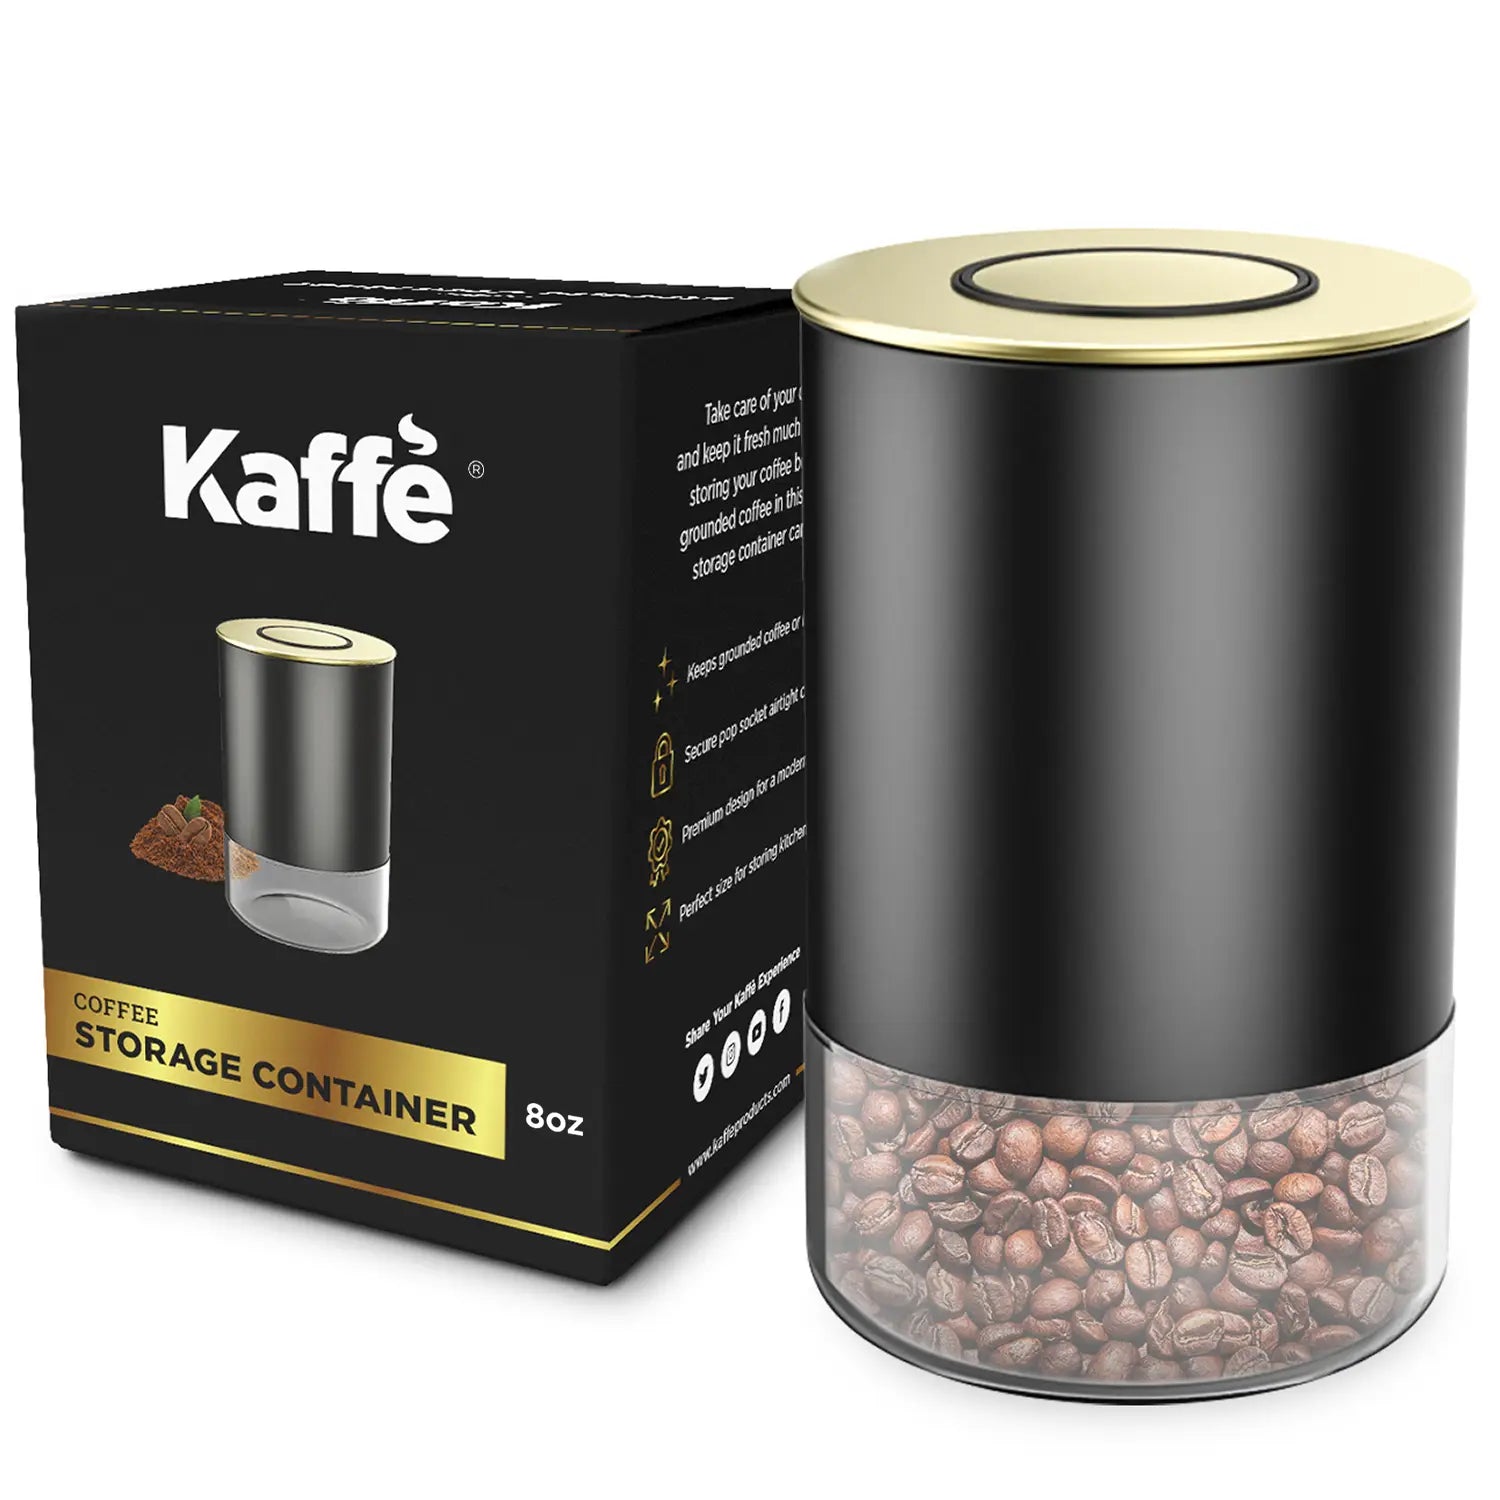 Kaffe Tea Canister Storage Container Black/Gold Round - 8 oz.